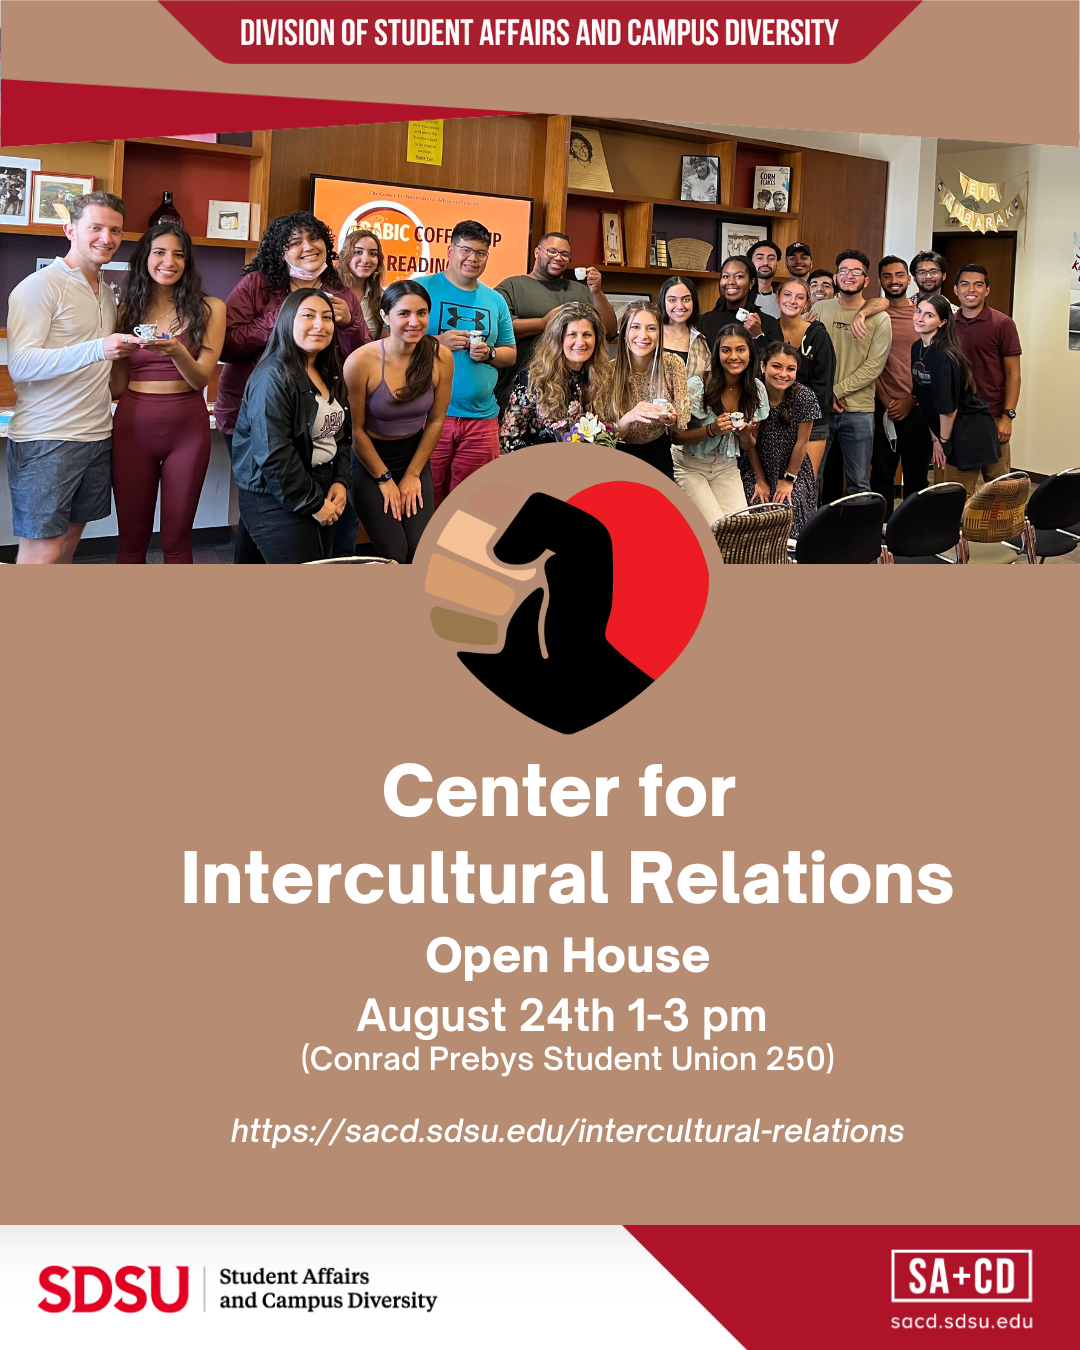 CIR Open House Aug 24, 1-3p at Student Union 250